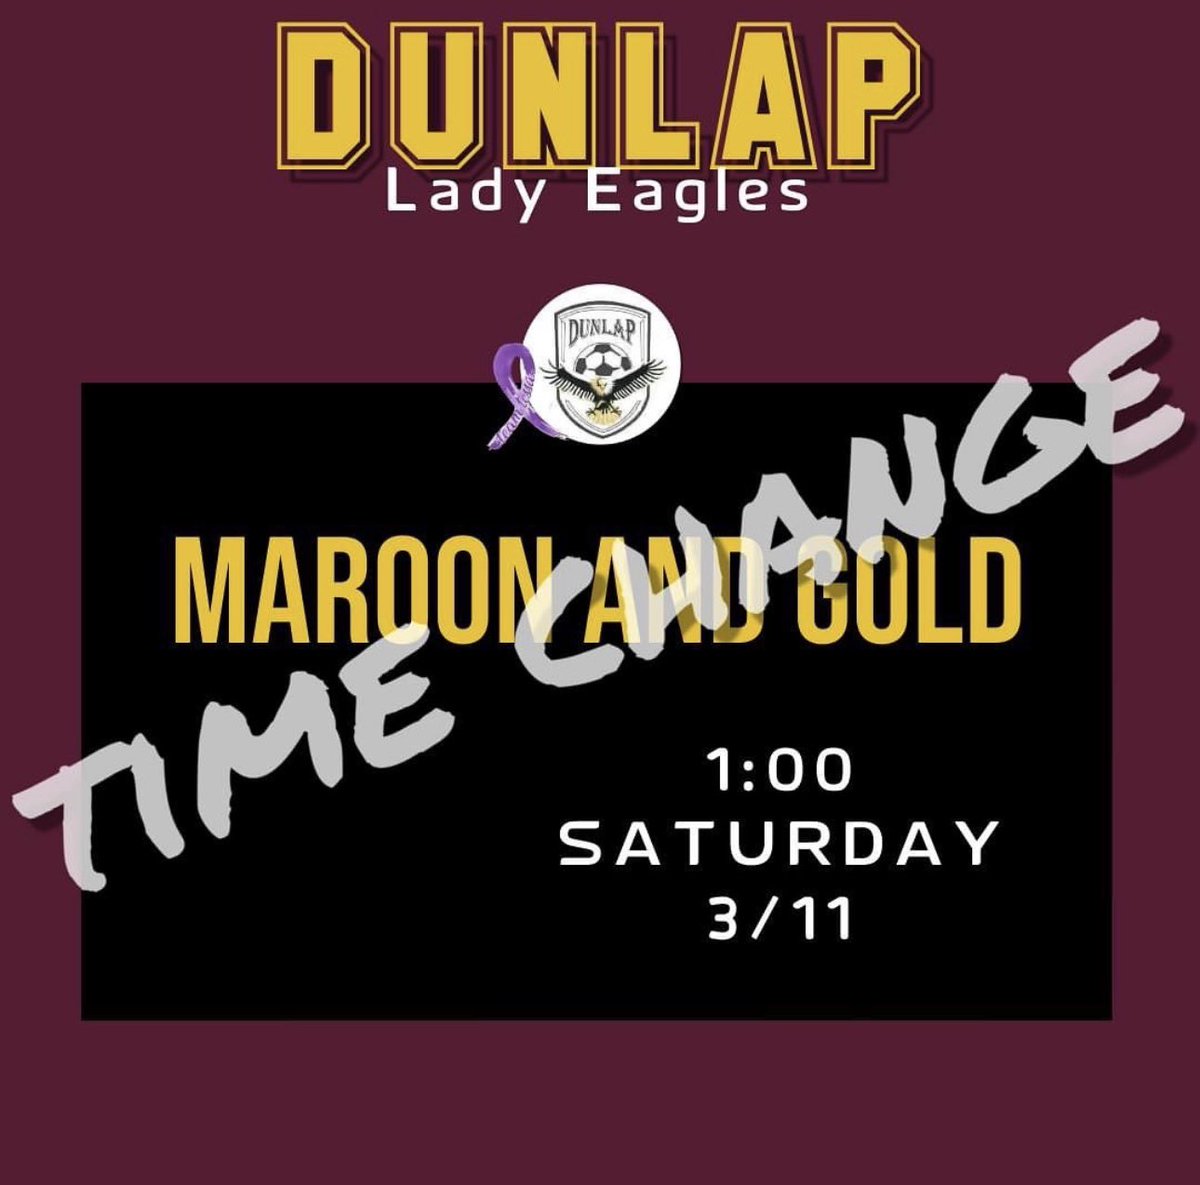 Come support your Lady Eagles at the Maroon and Gold game at 1 tomorrow!! #rolleags